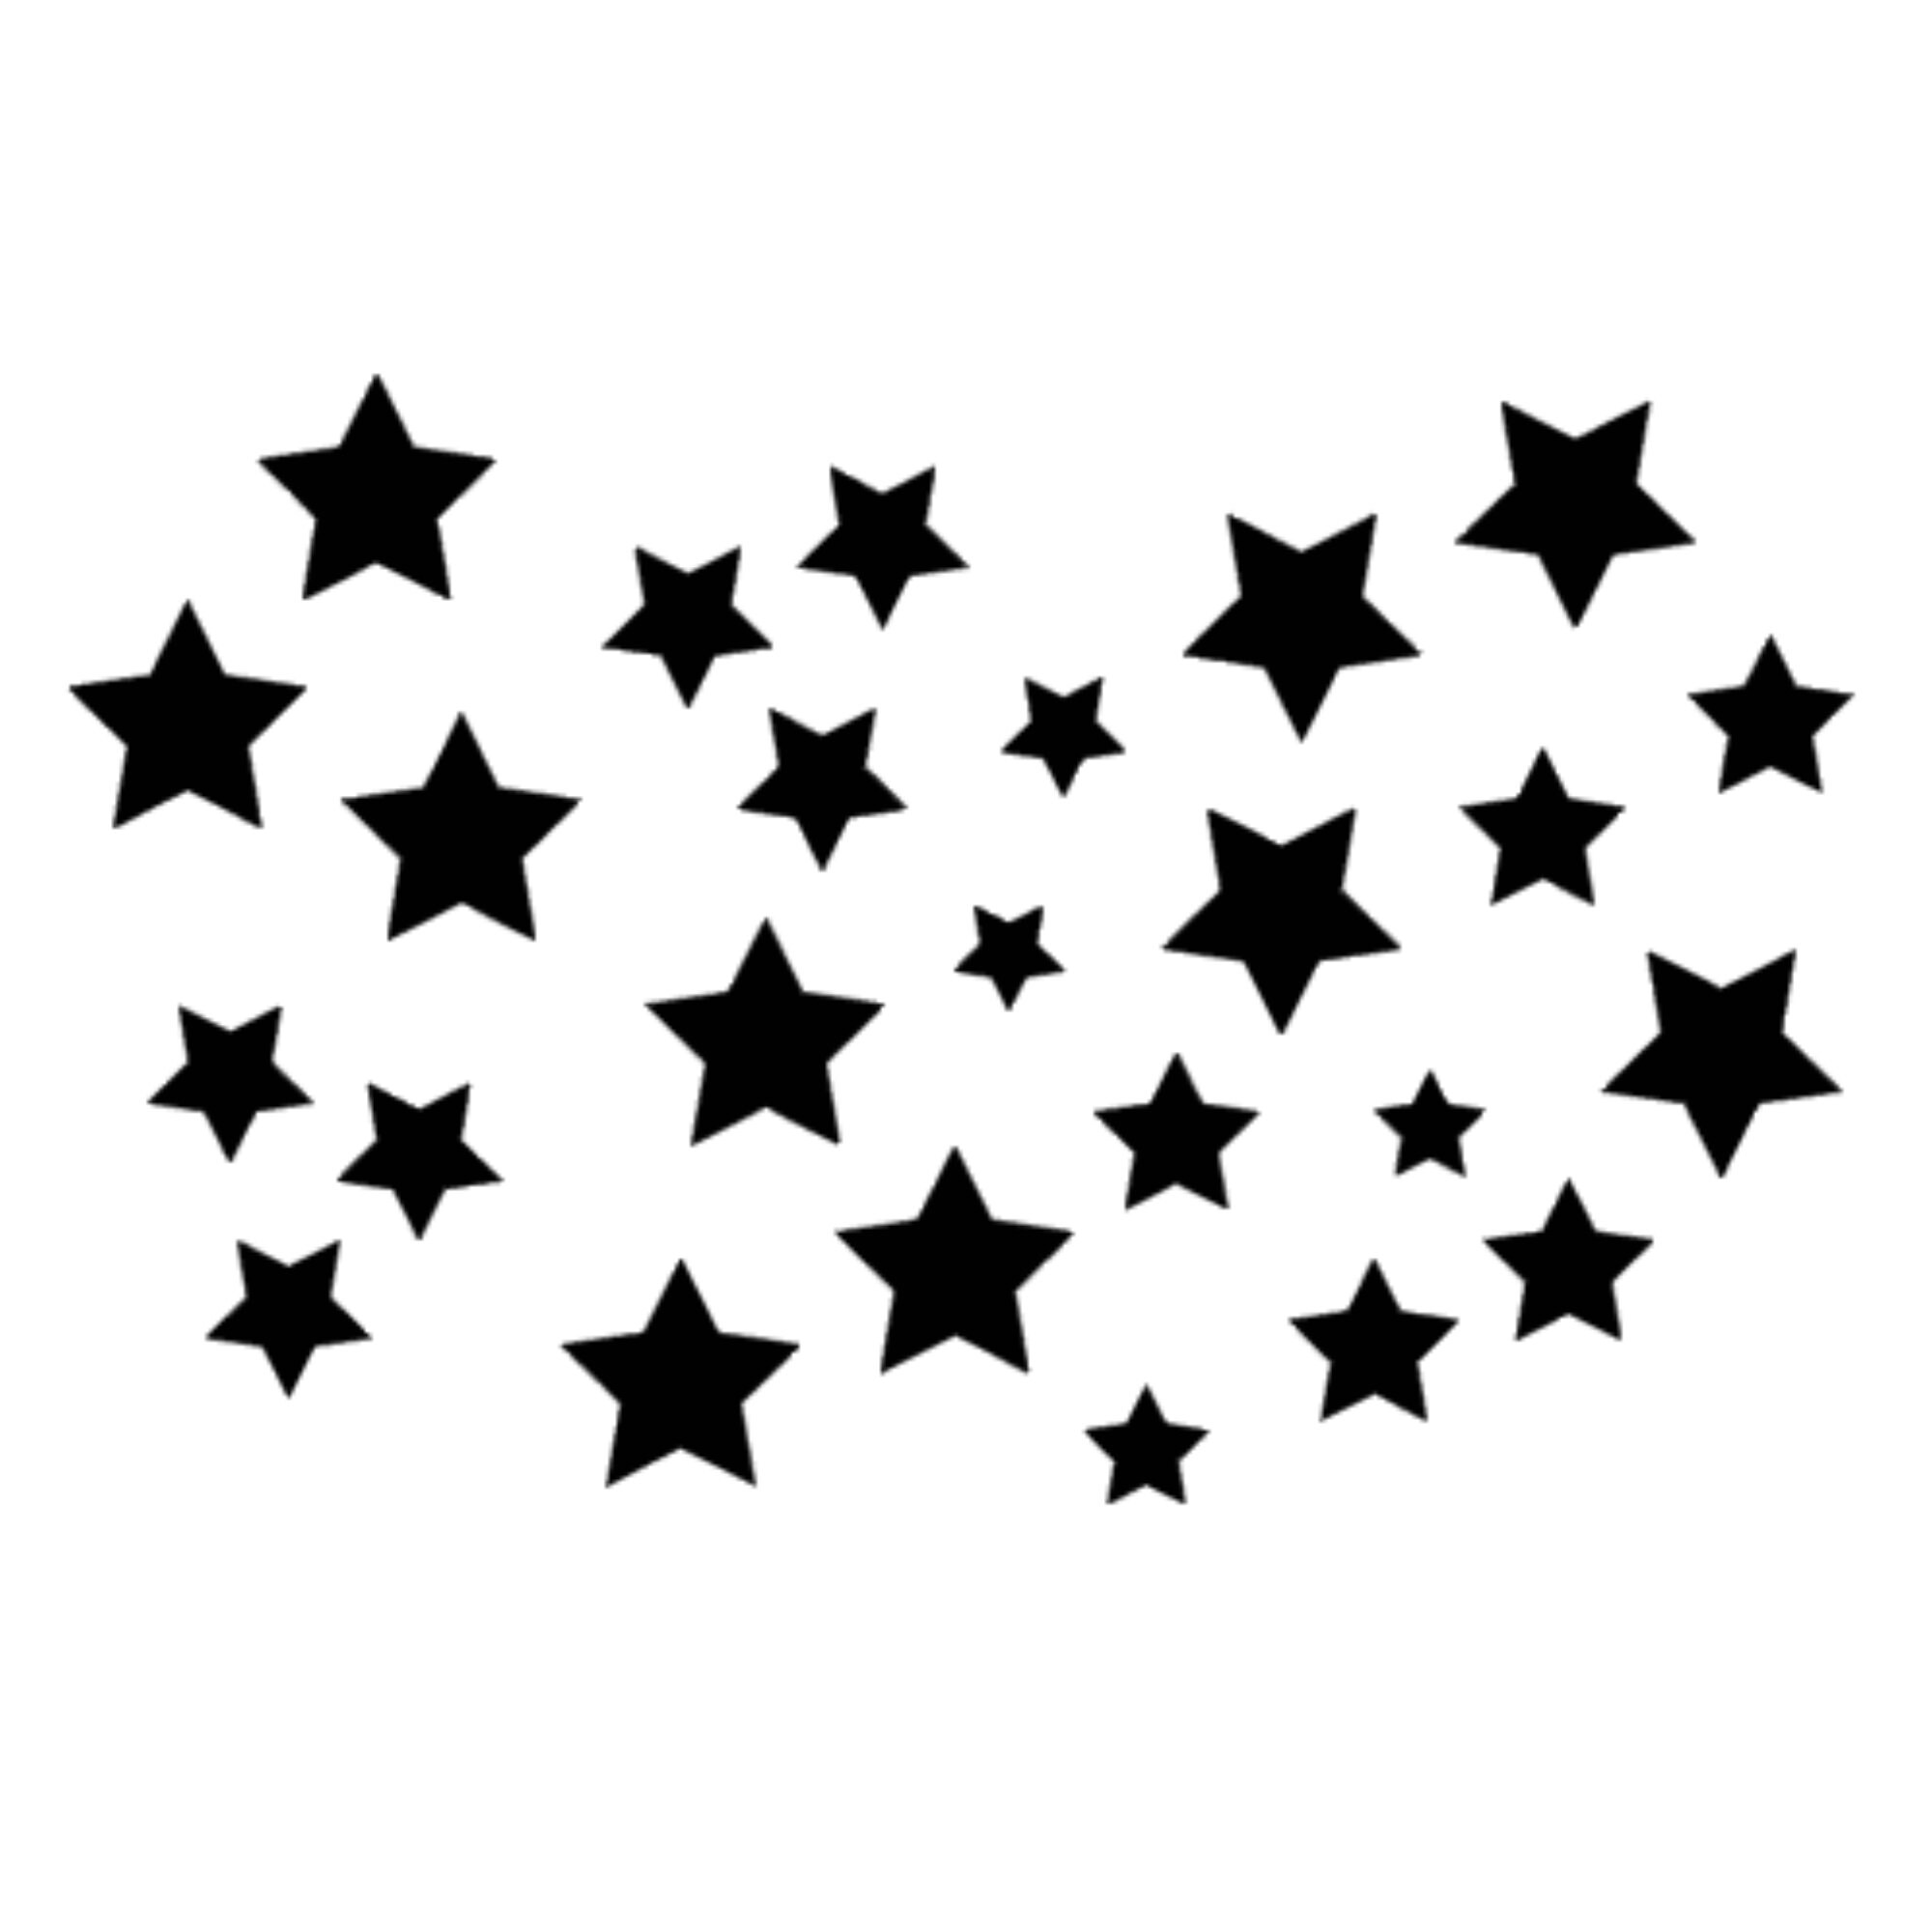 Sourdough Stencil Star Stencil Reusable Baking Stencil Stencil Baking  Decoration for Bread Cakes Cookies and Crafting Baking Gifts 